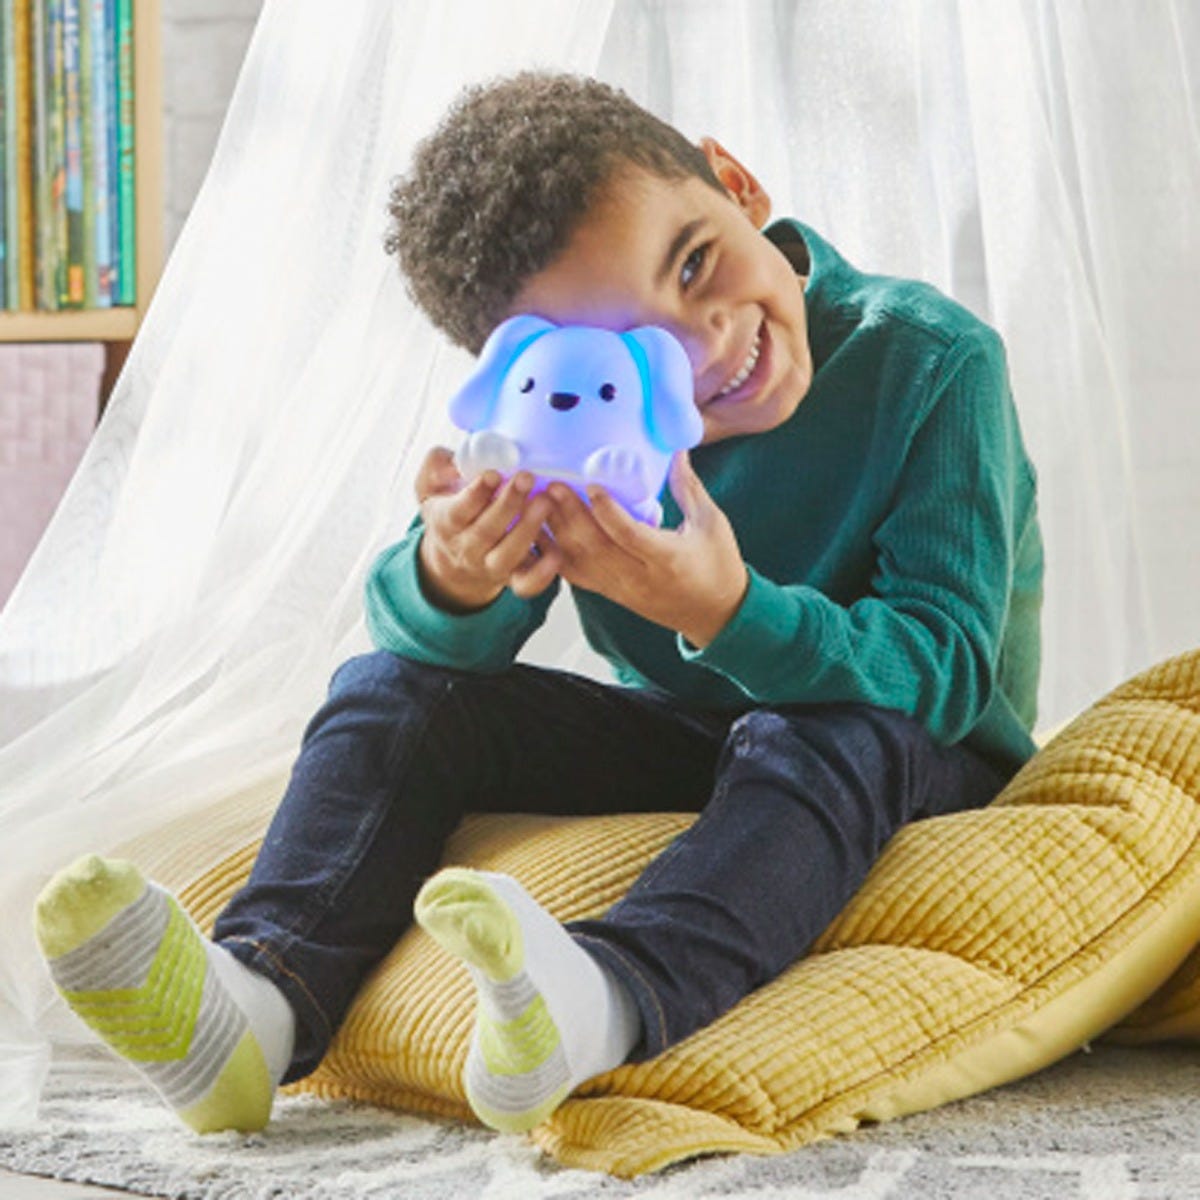 Pawz The Calming Pup, Practise mindfulness for kids with Pawz, The Calming Pup™, the light-up companion for children that’s also a night light. Squeeze Pawz’s foot and follow the lighting prompts that guide children through 3 breathing exercises for kids. Children inhale as Pawz gets brighter, and exhale as the light dims. Pawz has a built-in night light function that can be set for 5, 15, or 30 minutes. Follow along with Pawz, The Calming Pup’s guided breathing exercises for kids, inhaling as Pawz glows, a